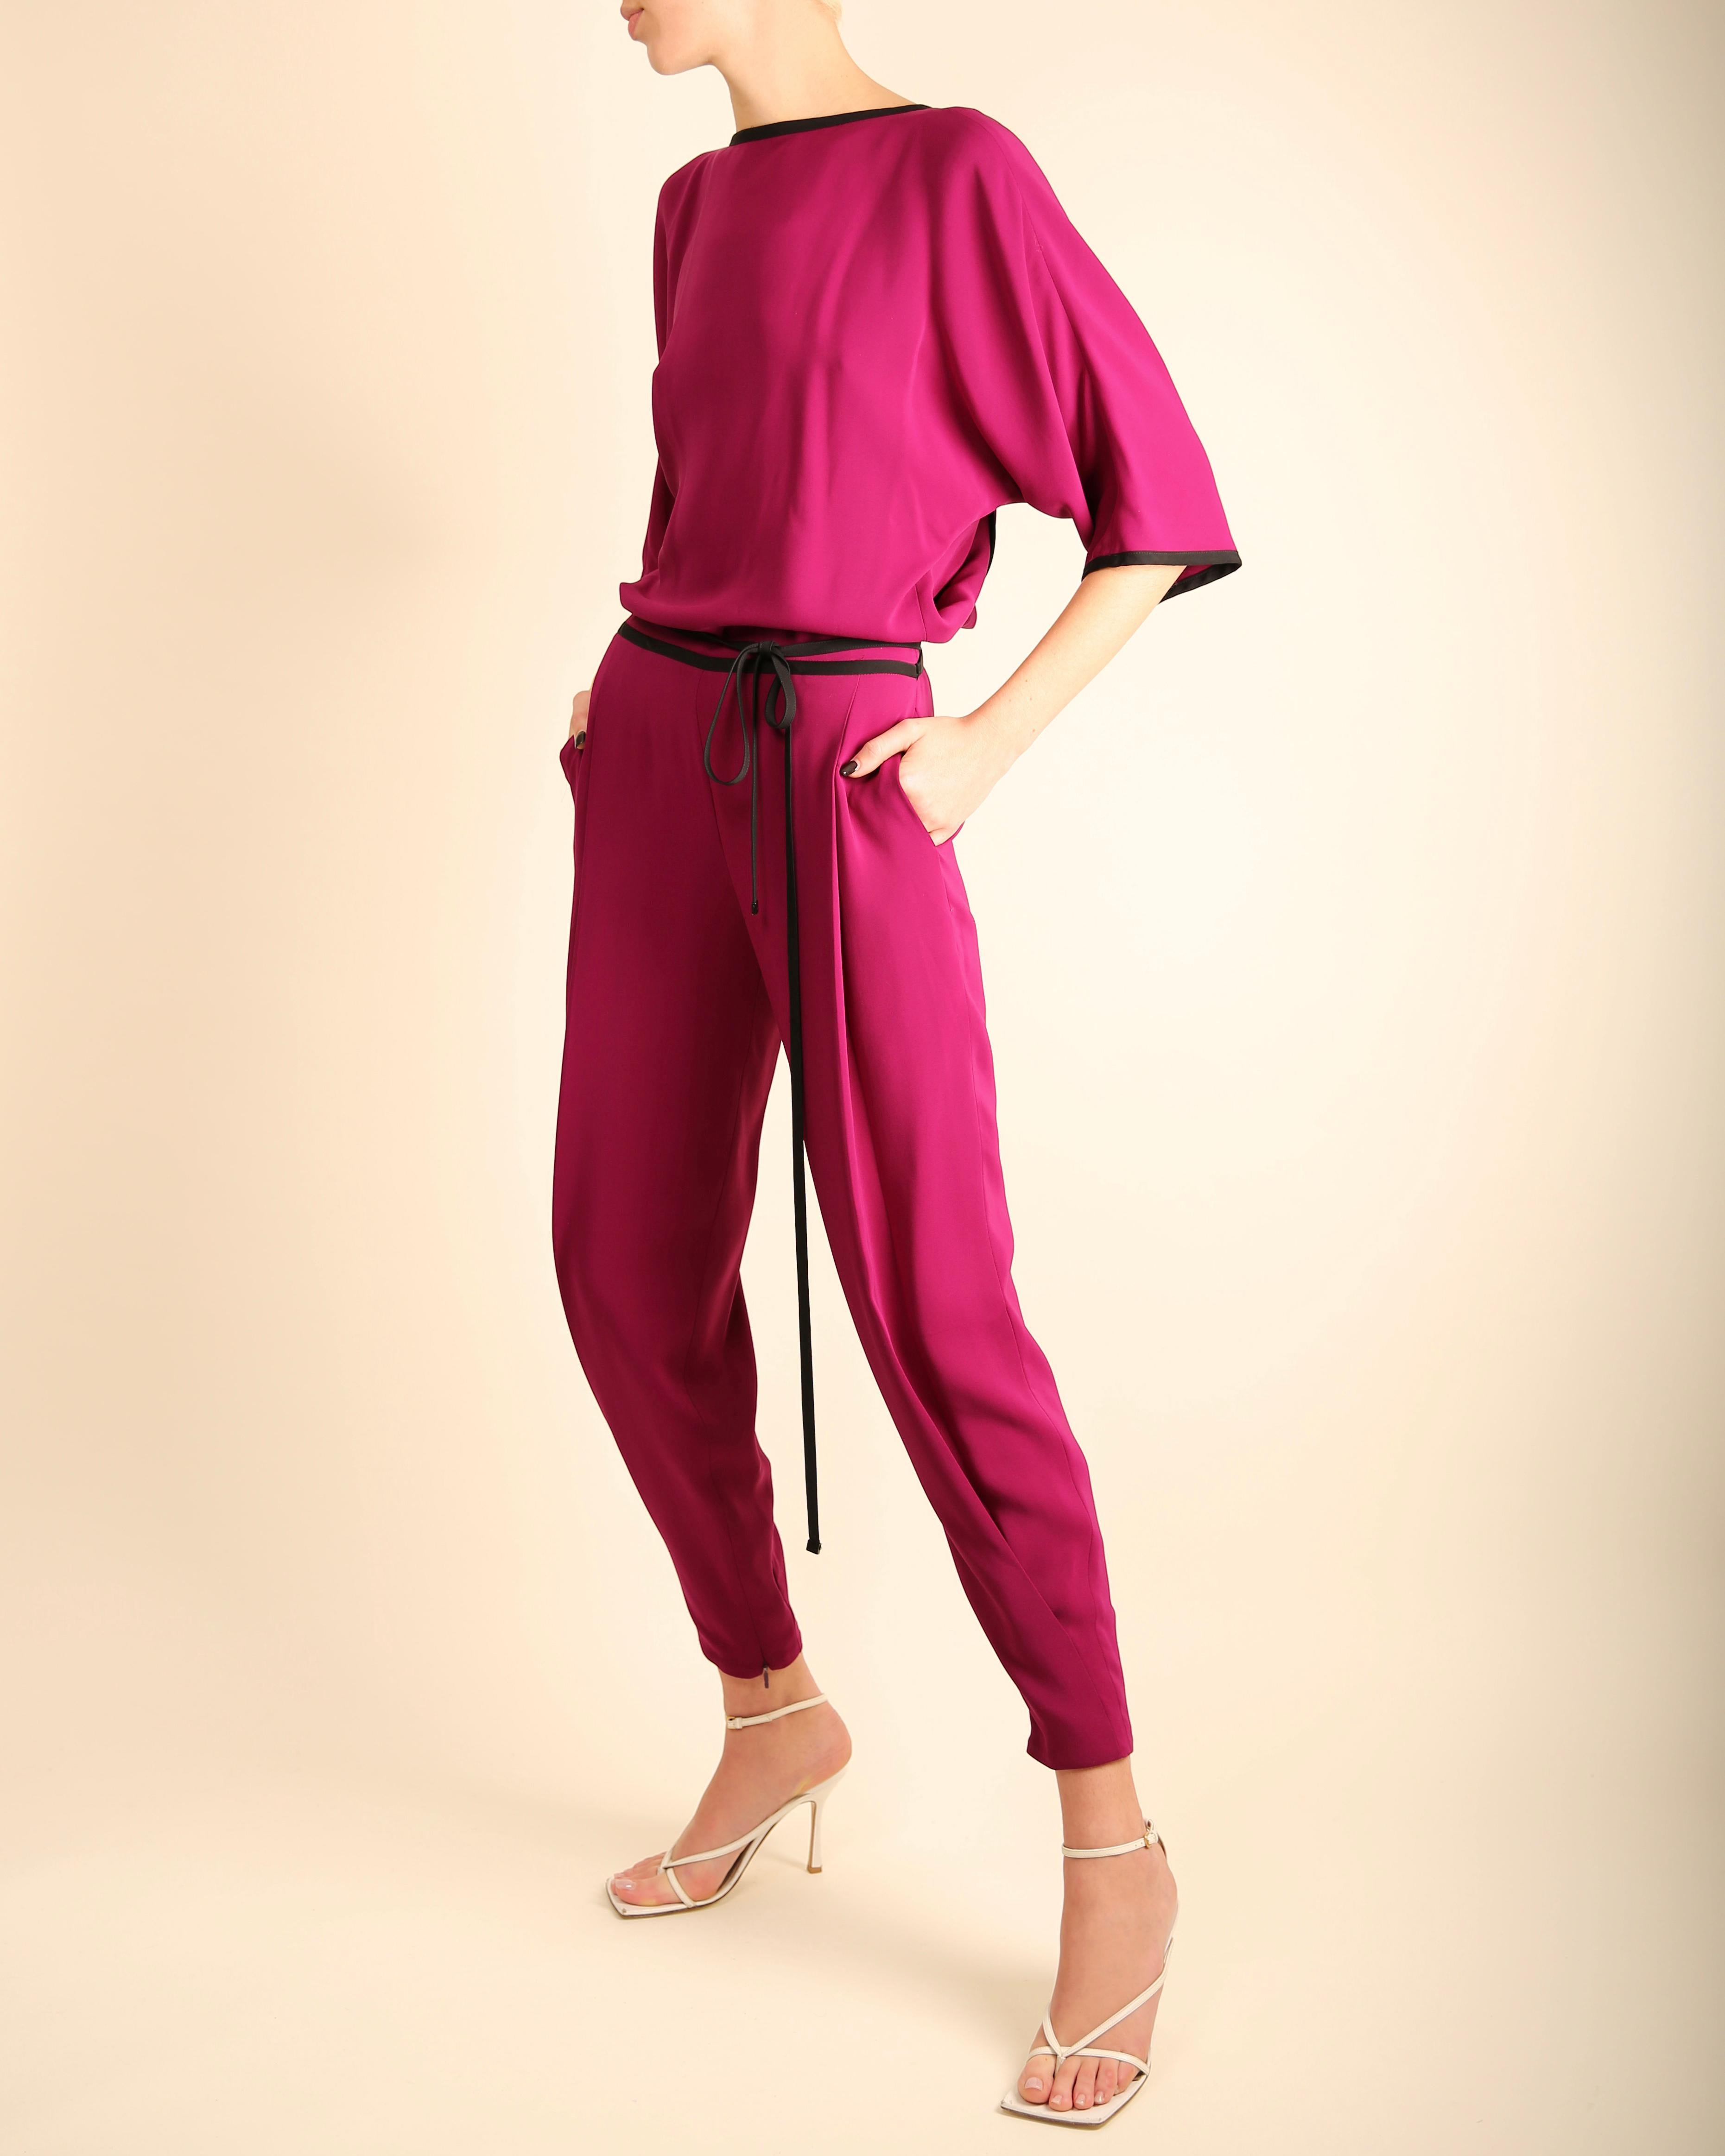 Women's Gucci S/S 2014 silk magenta black backless dolman tapered pant jumpsuit  For Sale